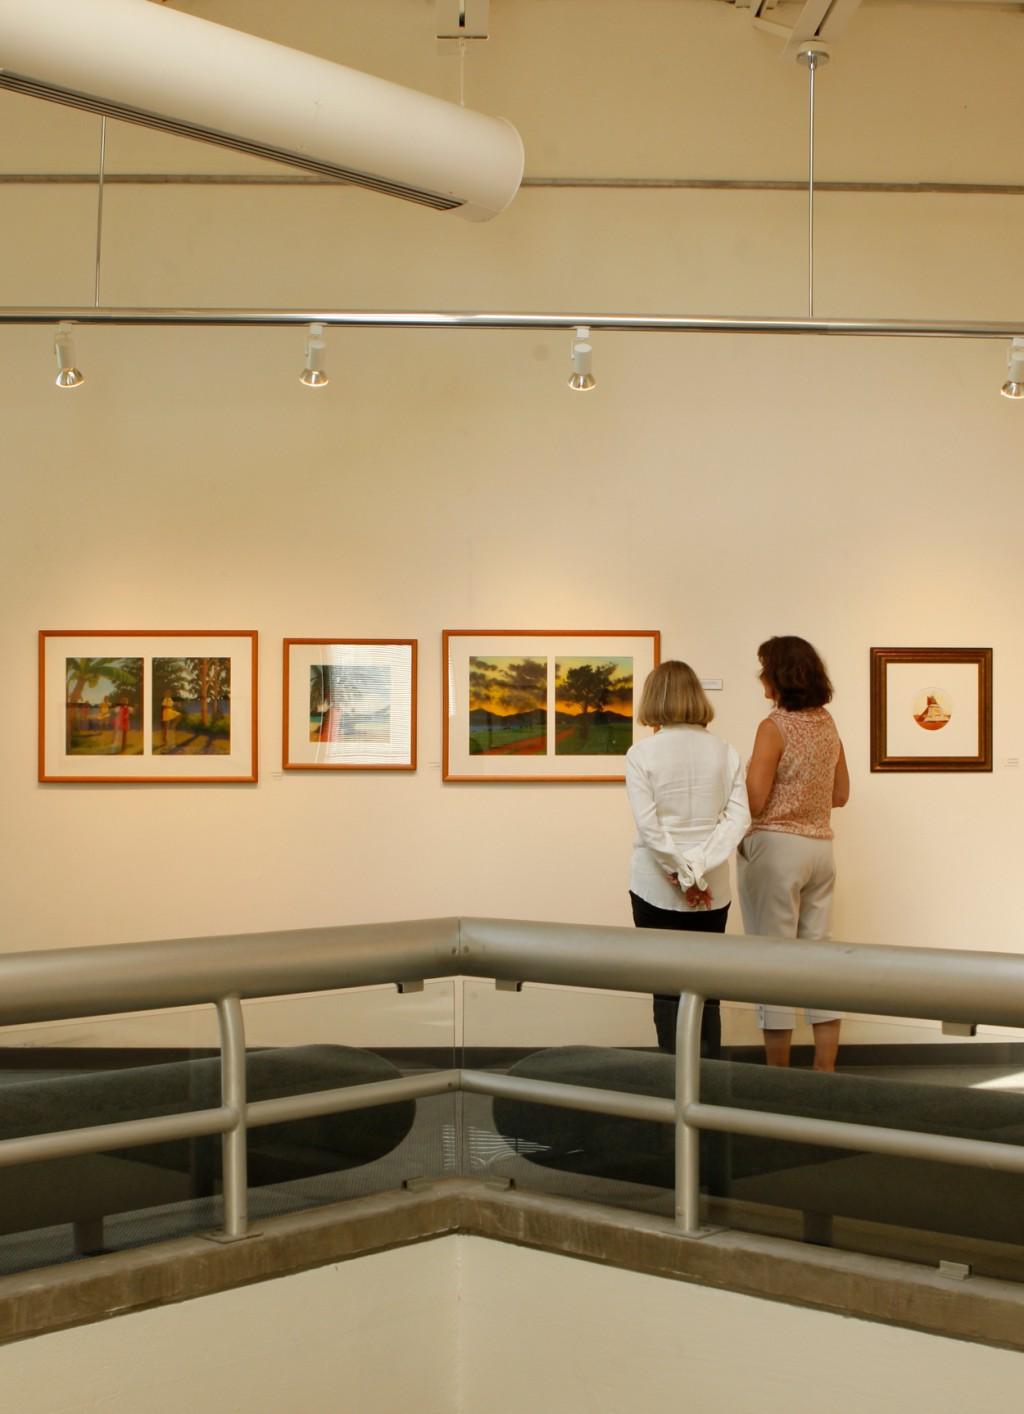 Two women look at a row of framed paintings hanging on a white wall in the Portland Campus art gallery